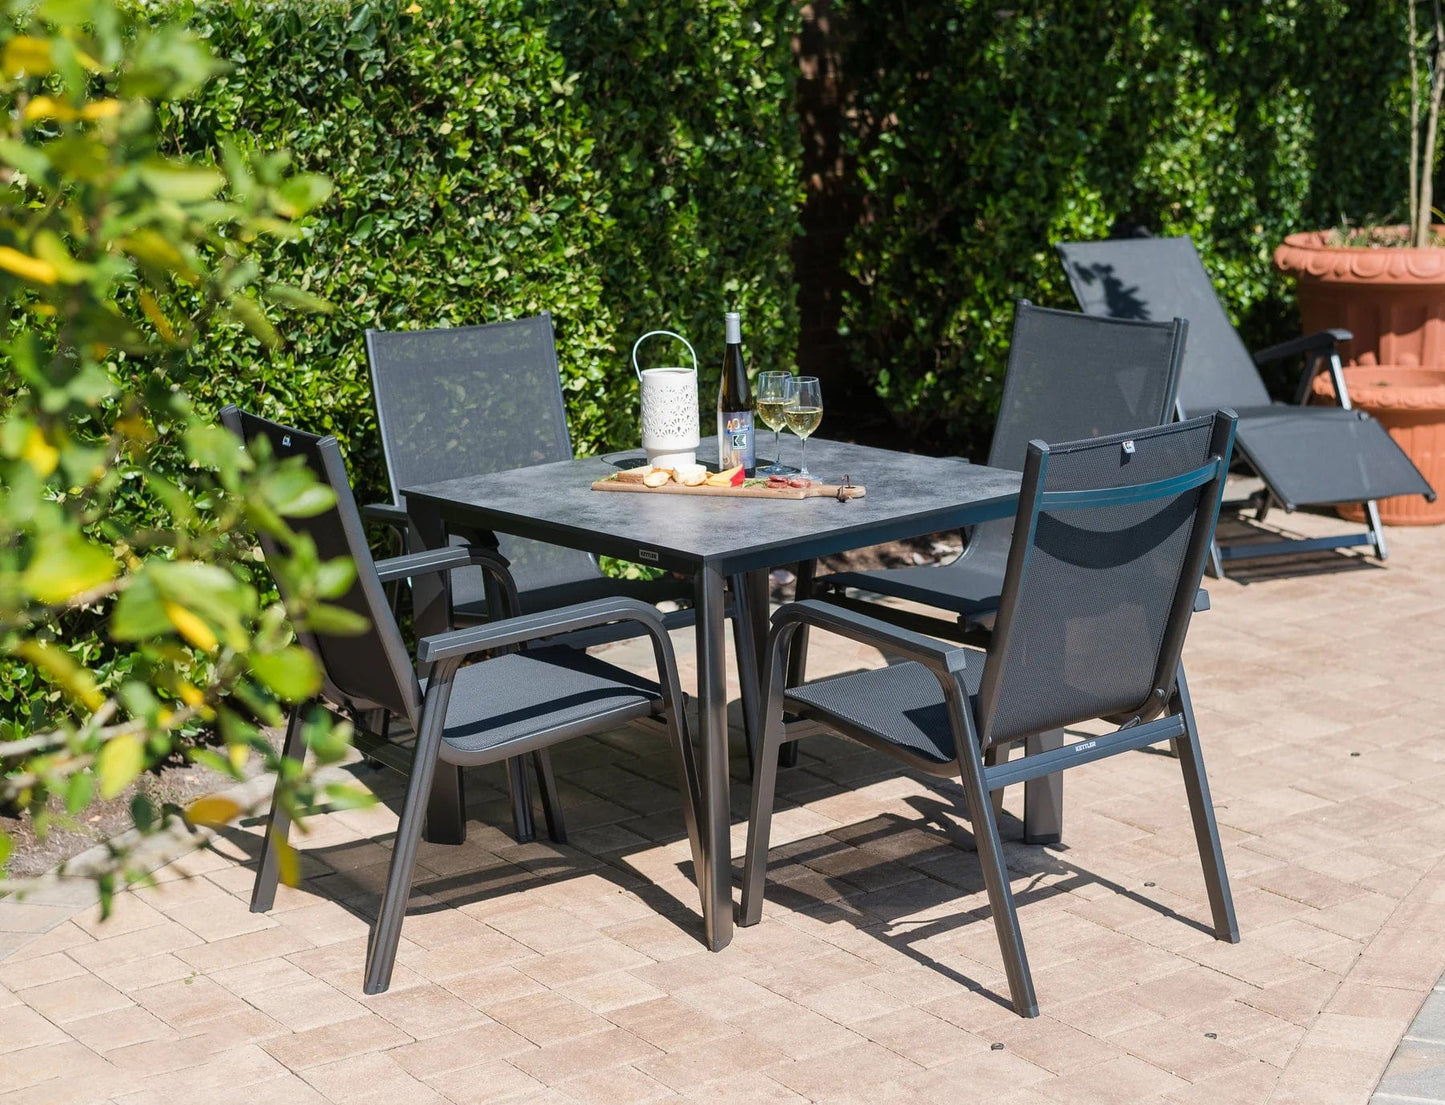 Set of 4 Stackable Outdoor Chairs 